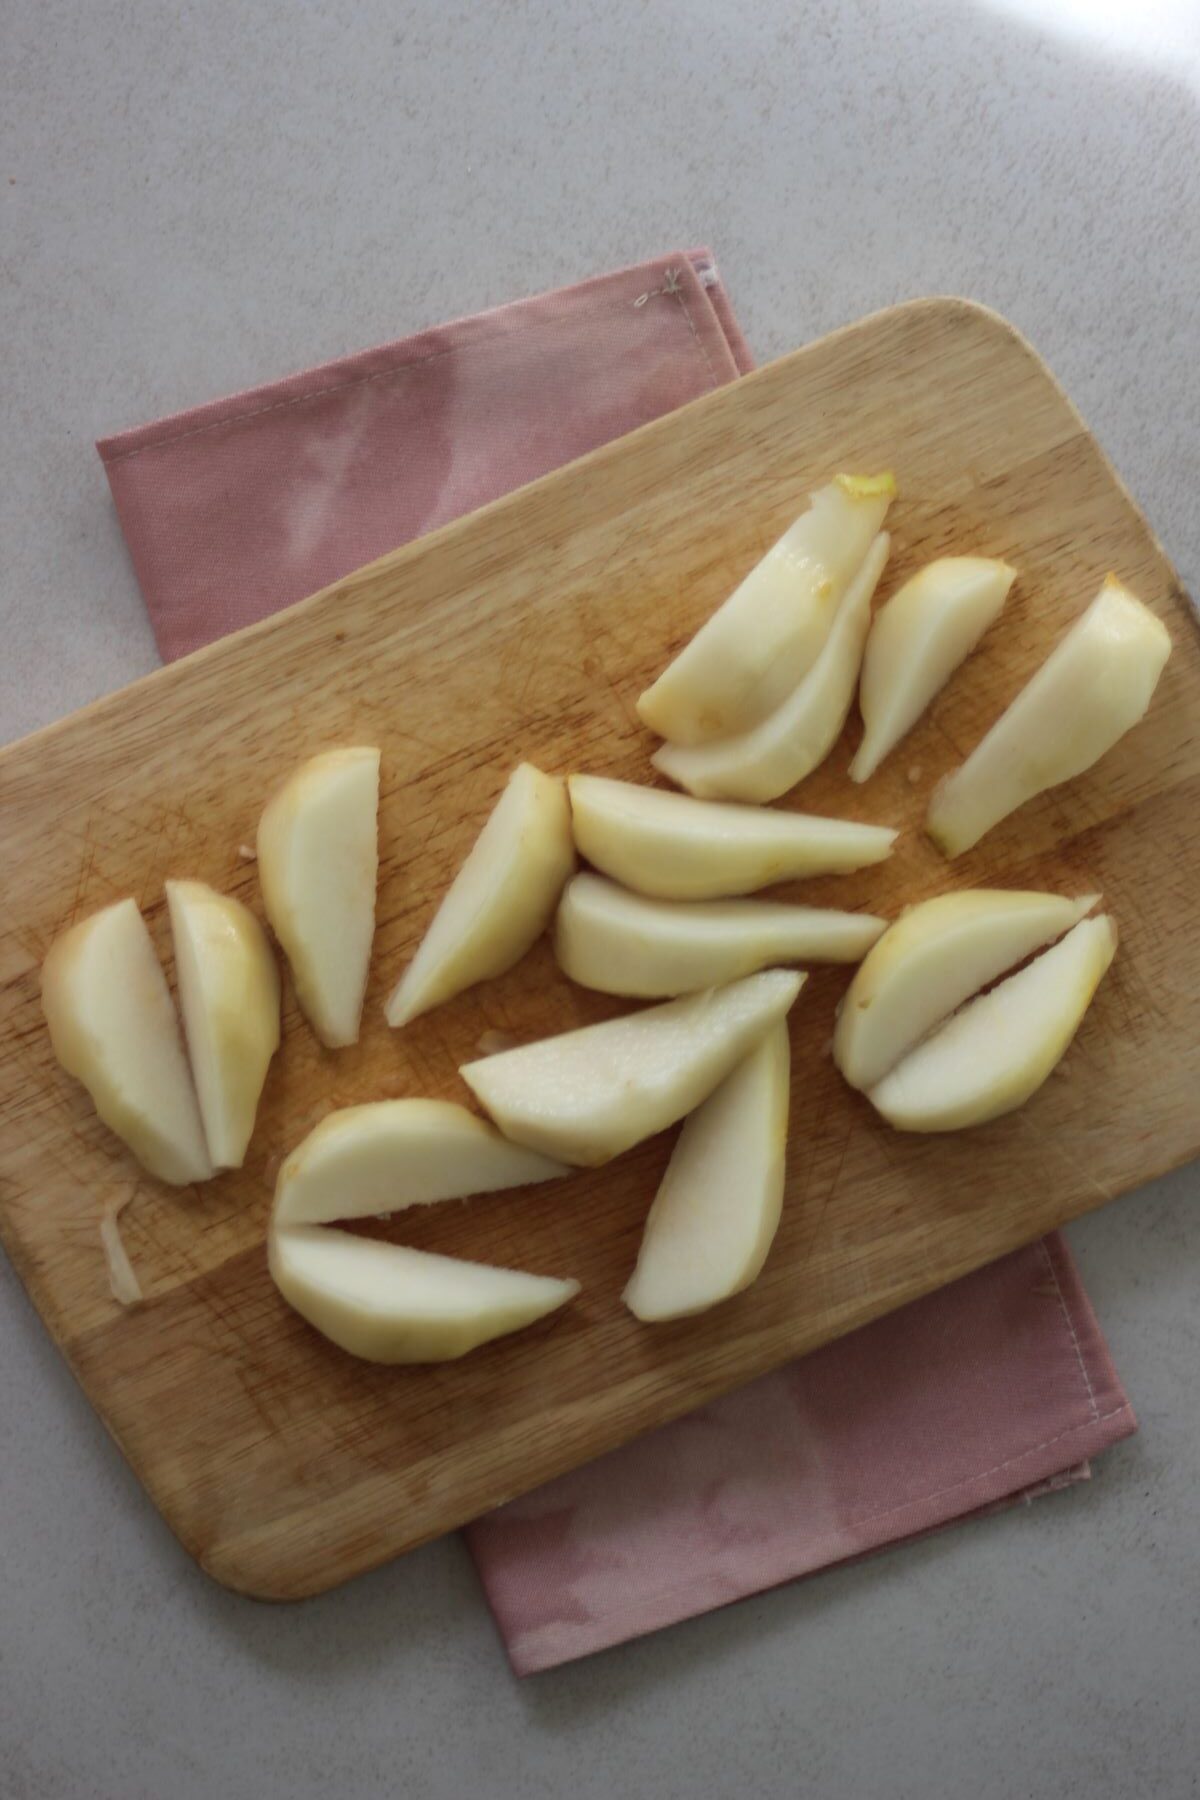 Sliced pears on a wooden table. Pink napkin under the wooden table.